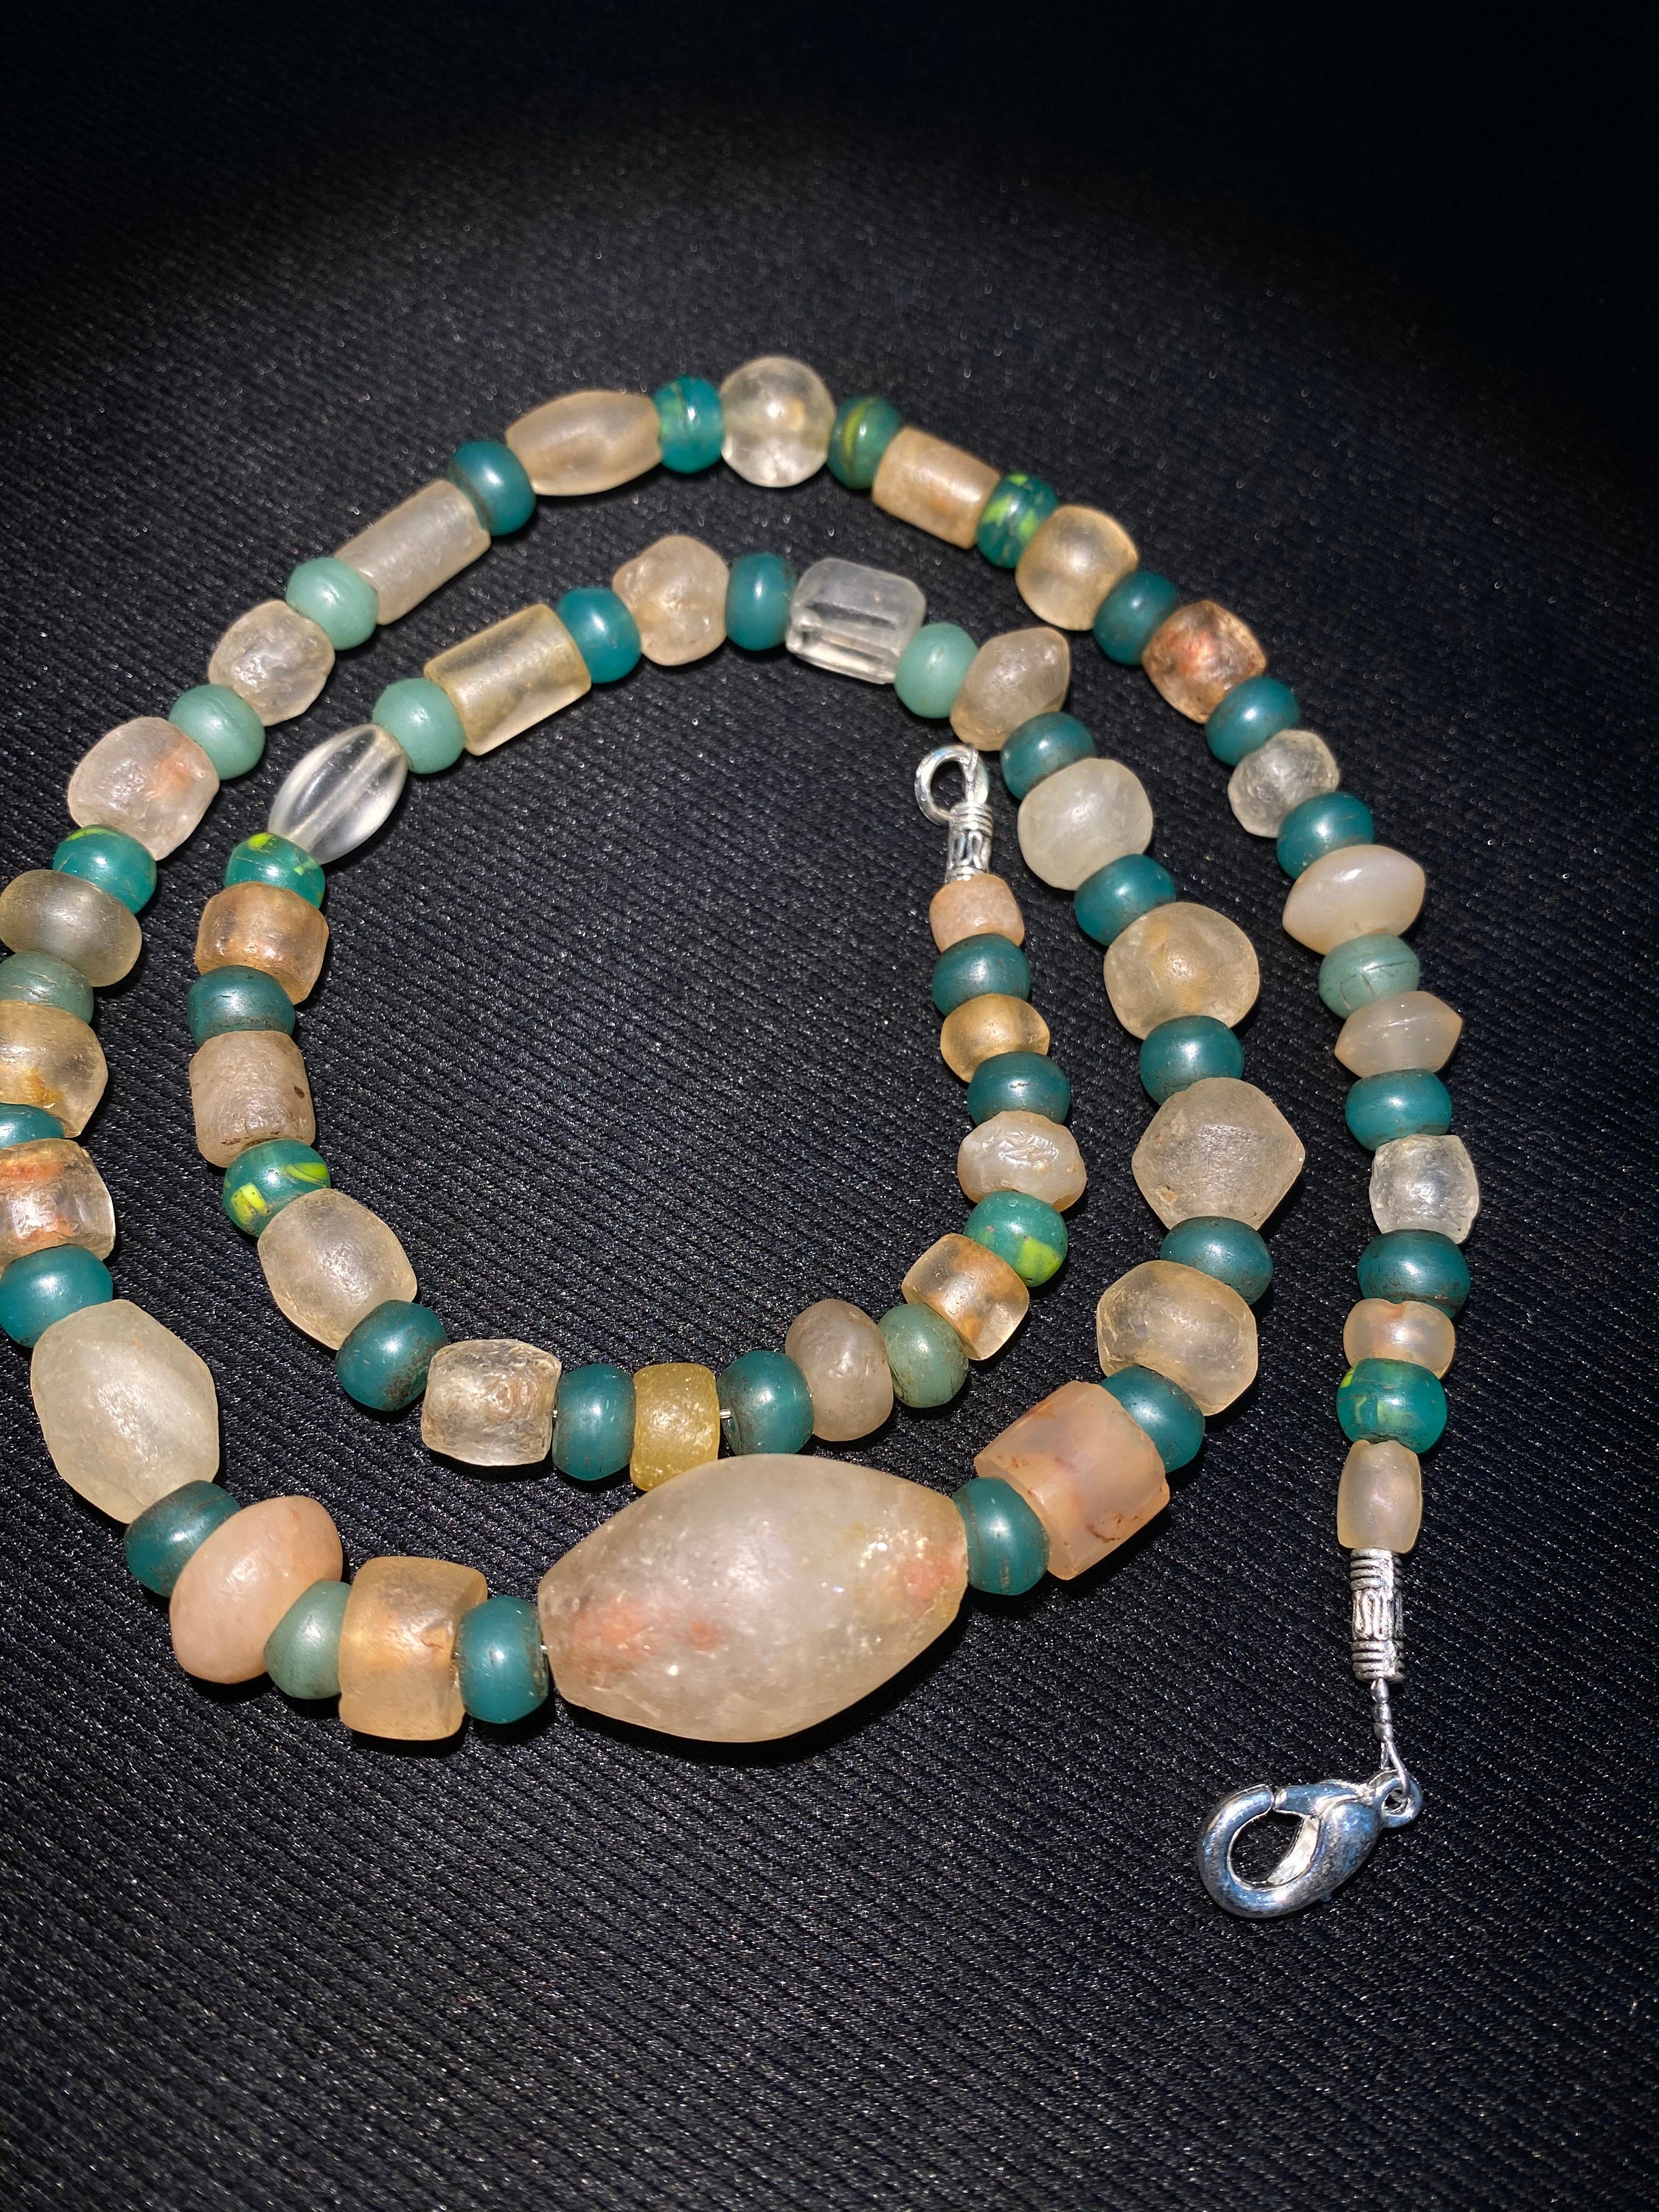 Ancient Quartz Beads Necklace From Neolithic Period - Etsy